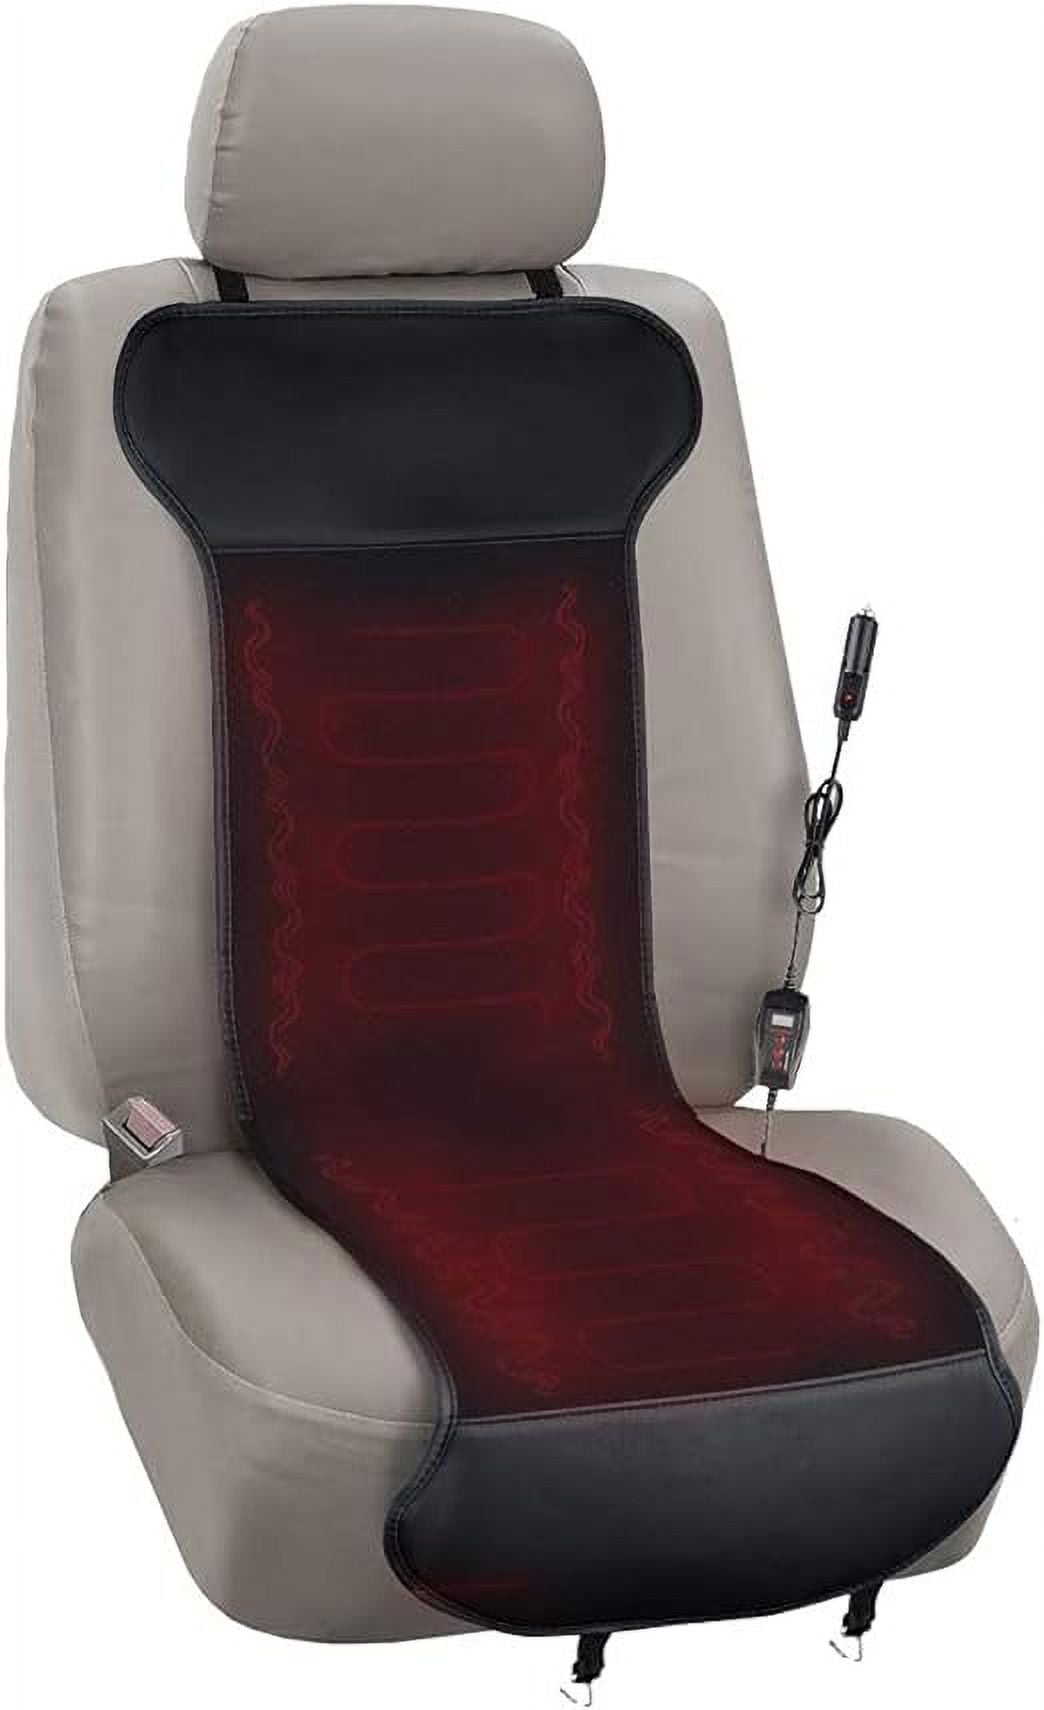  WellUp Heating Pad Heated Seat Cover for Winter